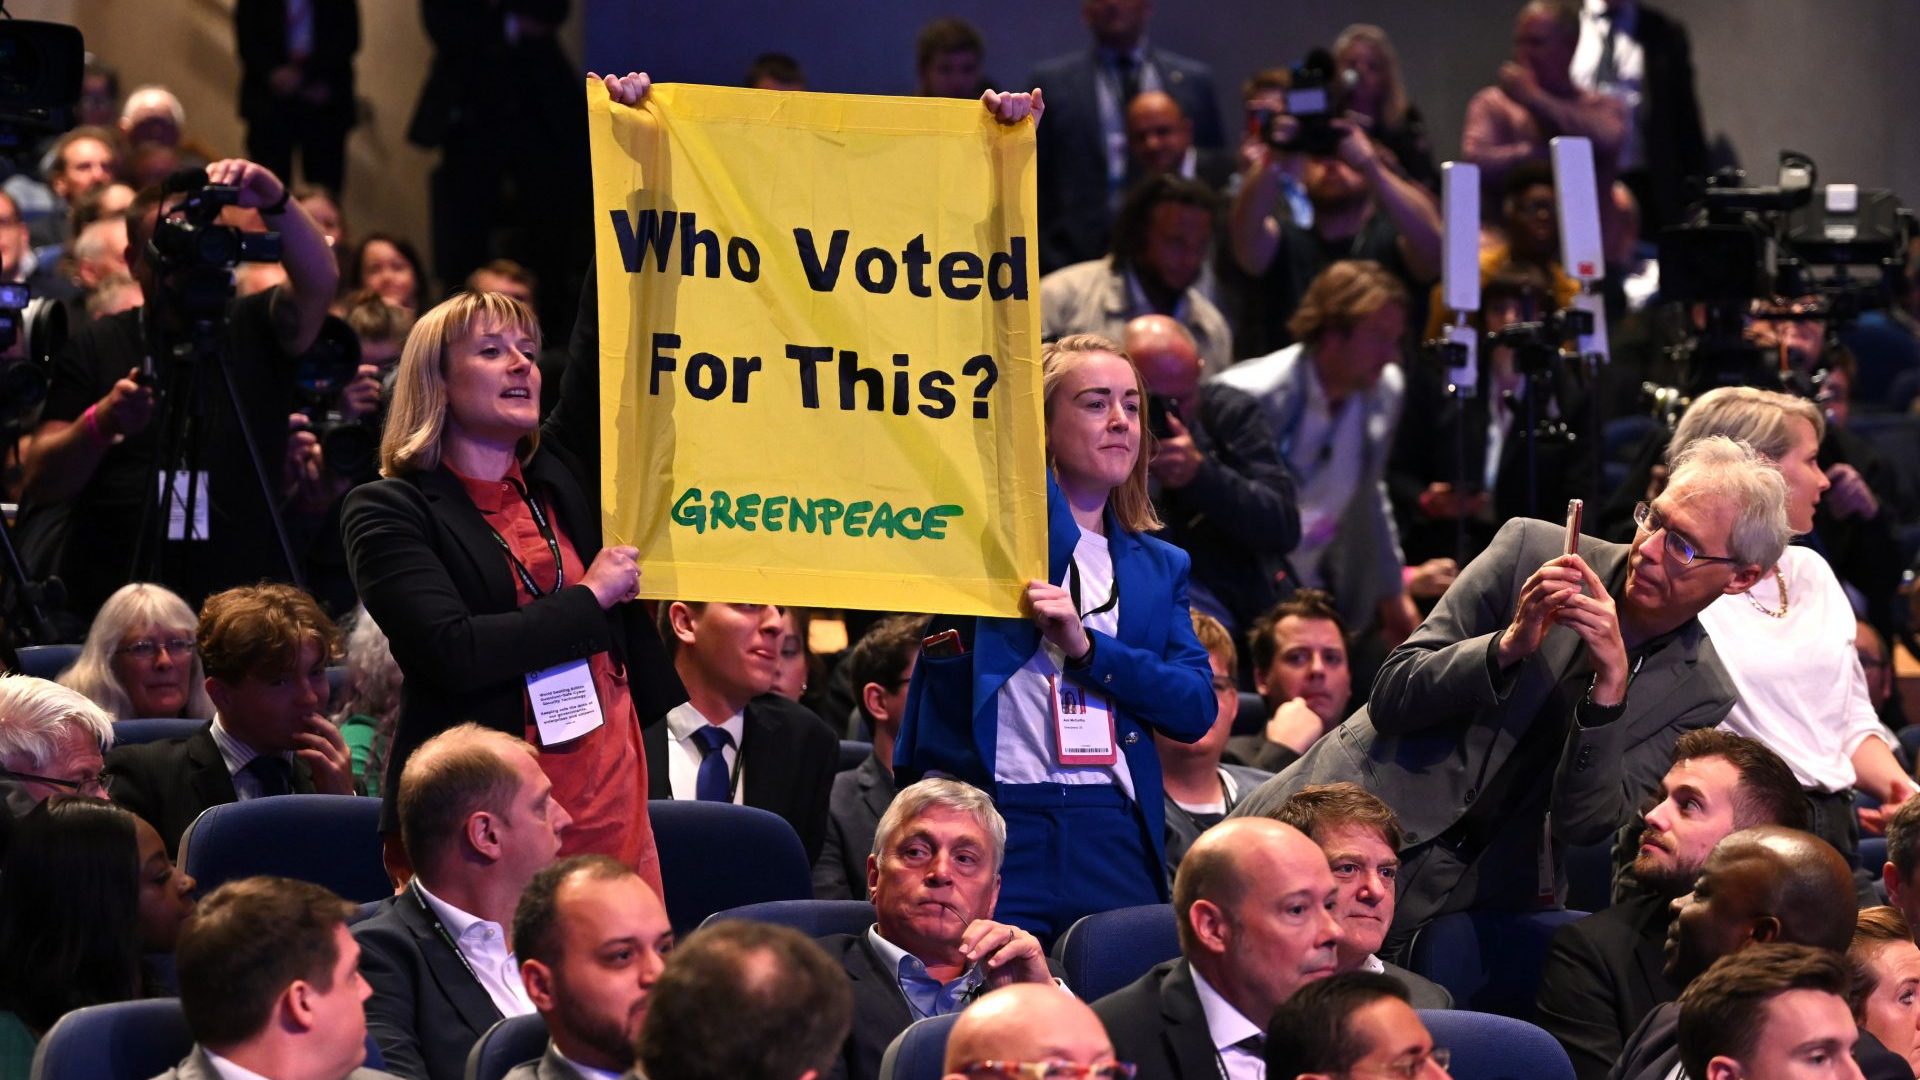 Greenpeace protesters disrupt the prime minister's Liz Truss keynote speech on the final day of the Conservative Party conference (Photo by Leon Neal/Getty Images)